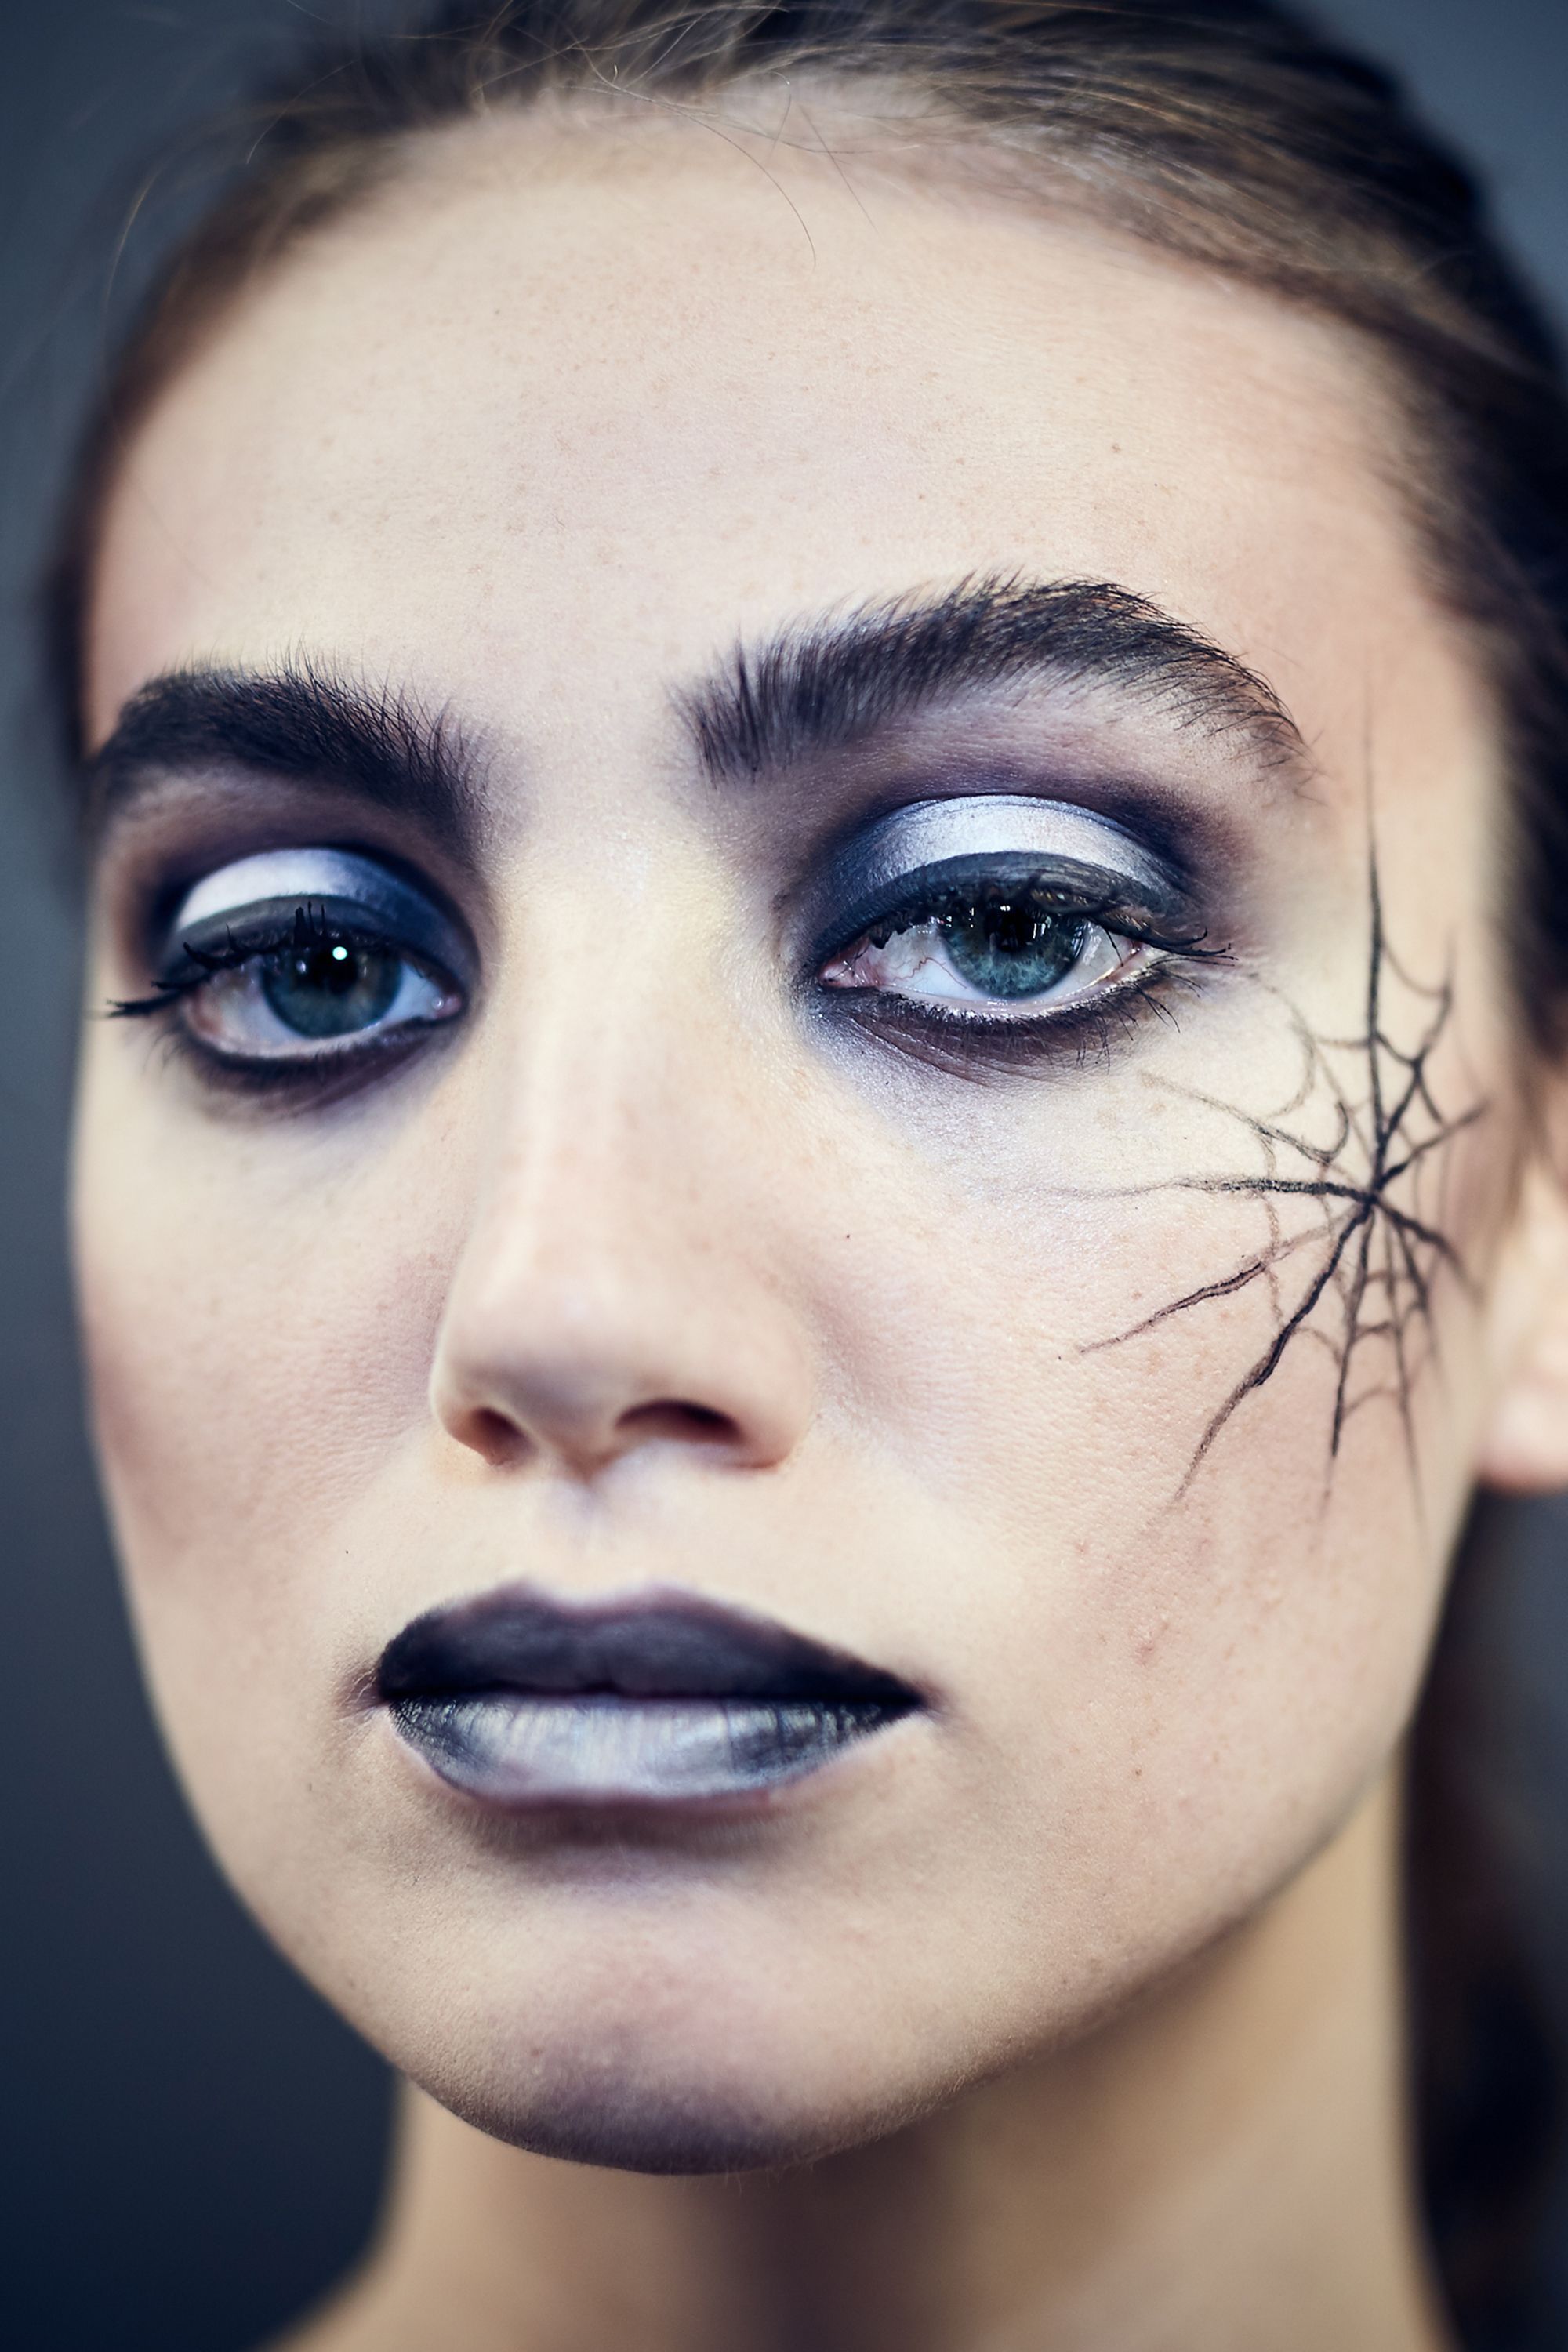 Spider-Web Halloween Make-Up, A Step-By-Step Picture Guide